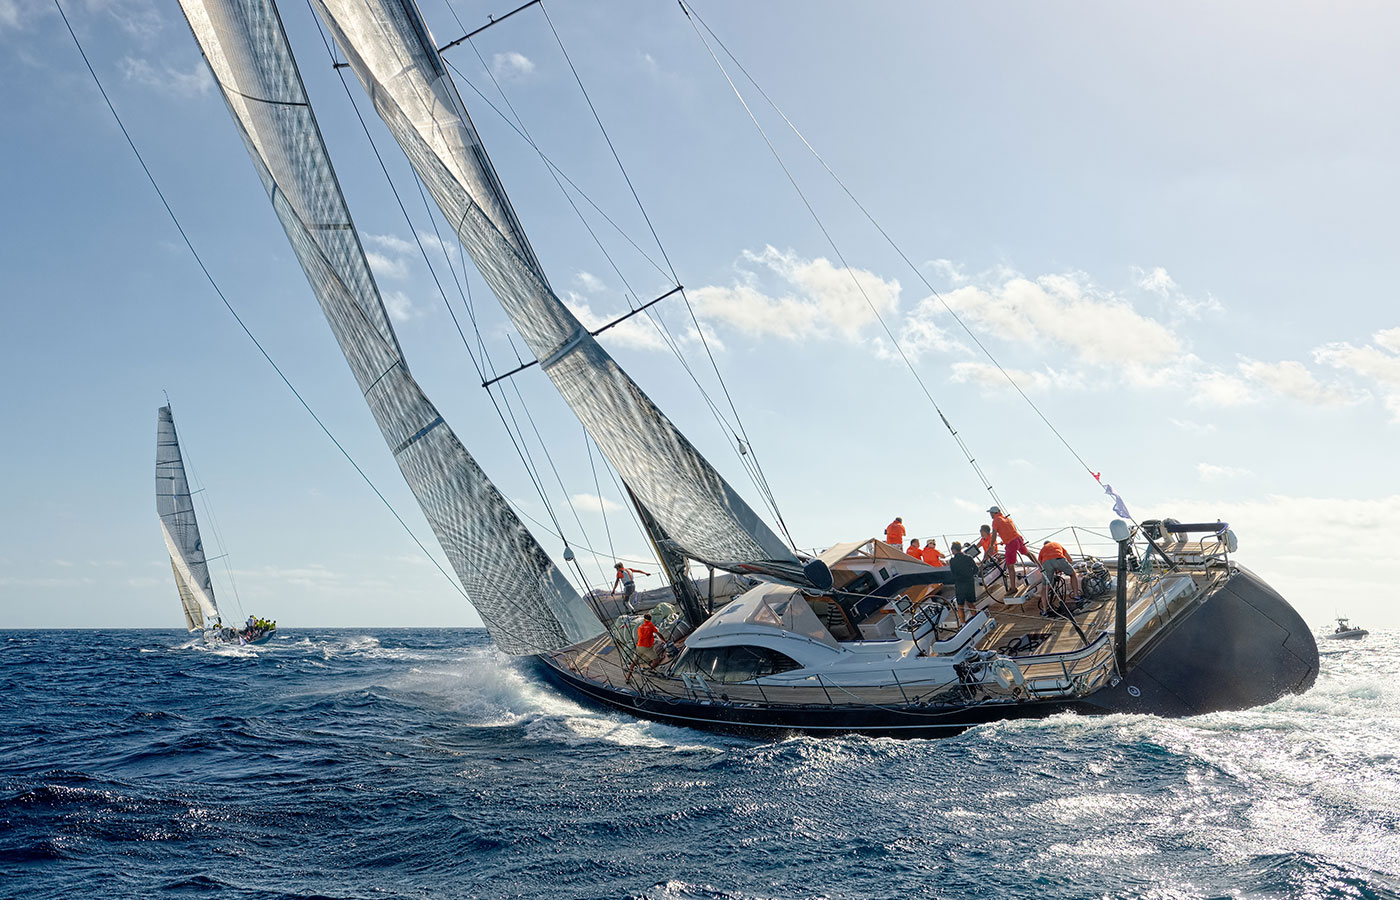 Beacon of Hope Sailing Project Launches a Round the World Yacht